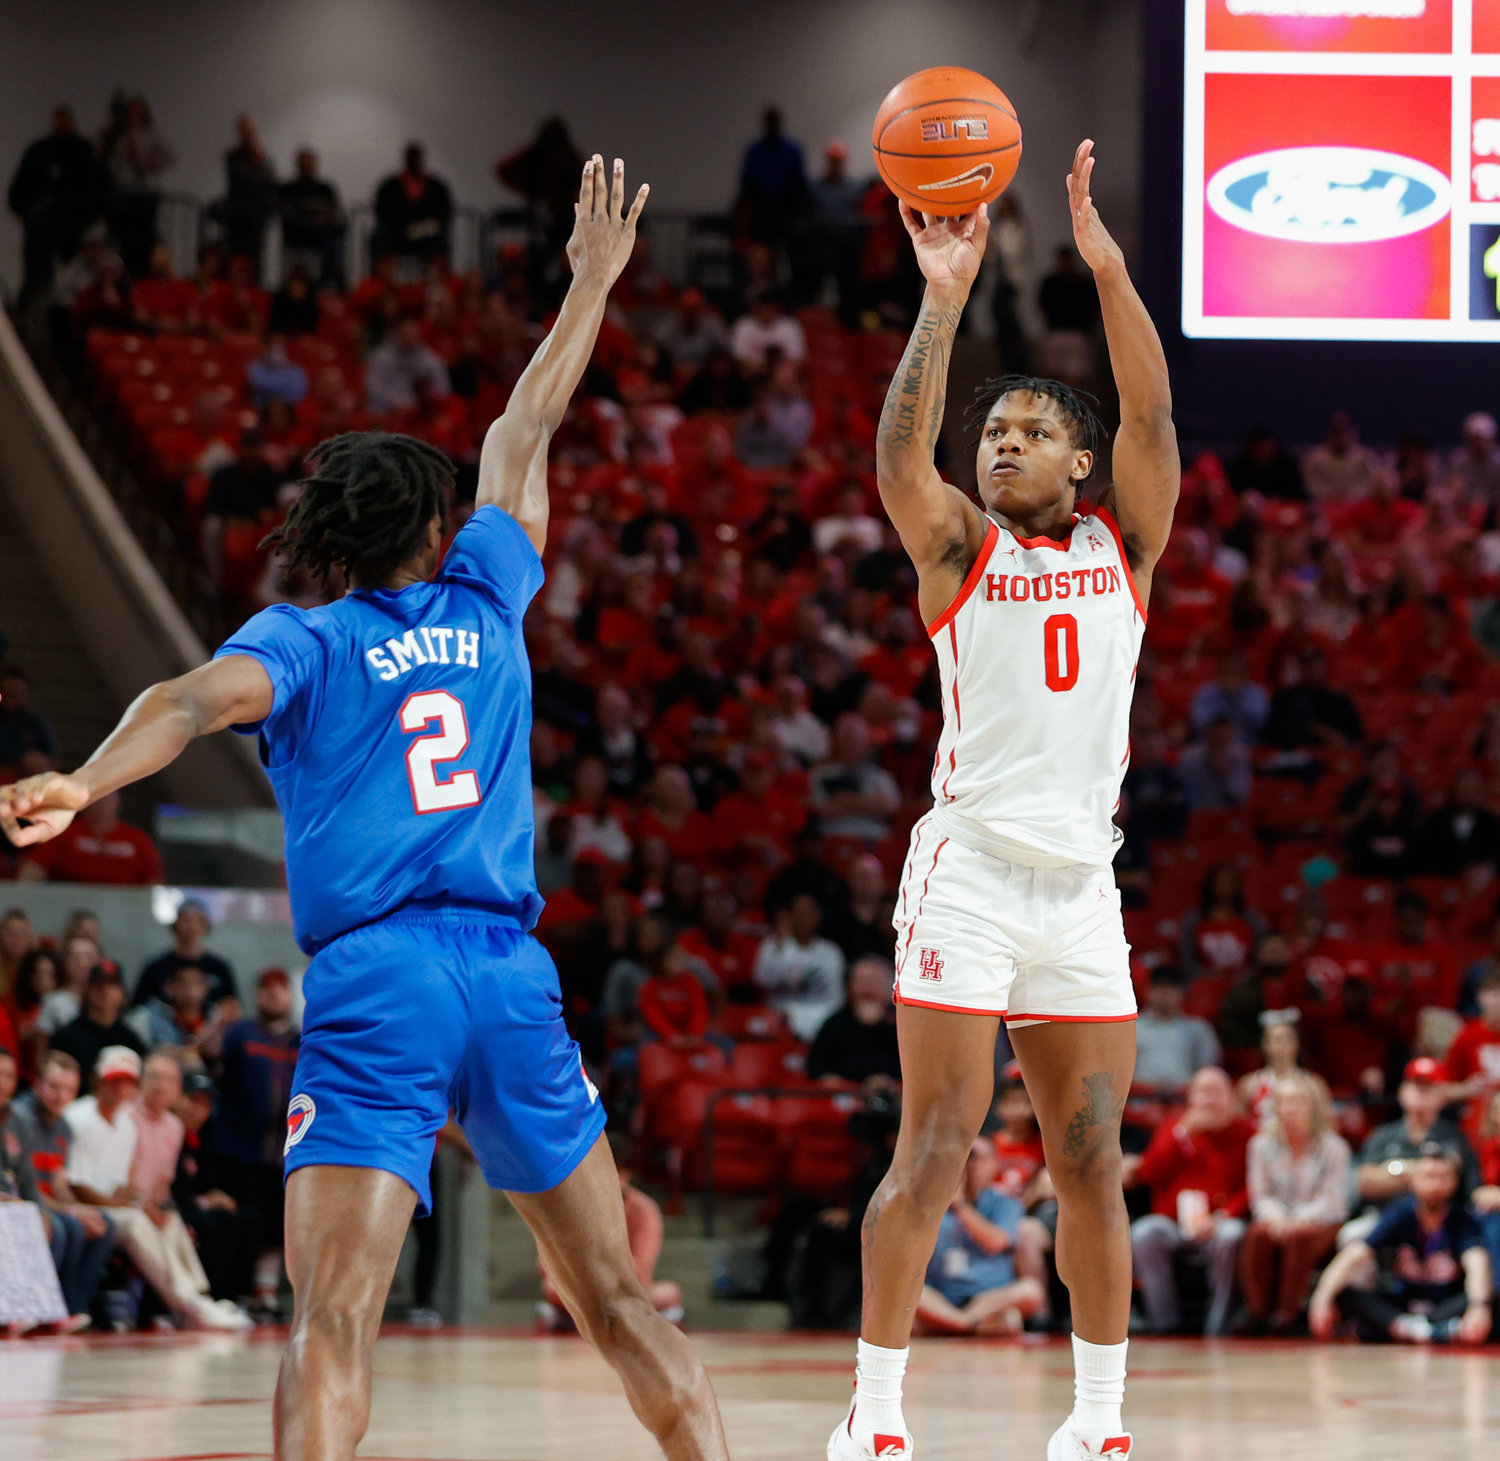 Houston guard Marcus Sasser (0) shoots a jump shot during an NCAA men’s basketball game between the Houston Cougars and the Southern Methodist Mustangs on Jan. 5, 2023 in Houston. Houston won, 87-53,